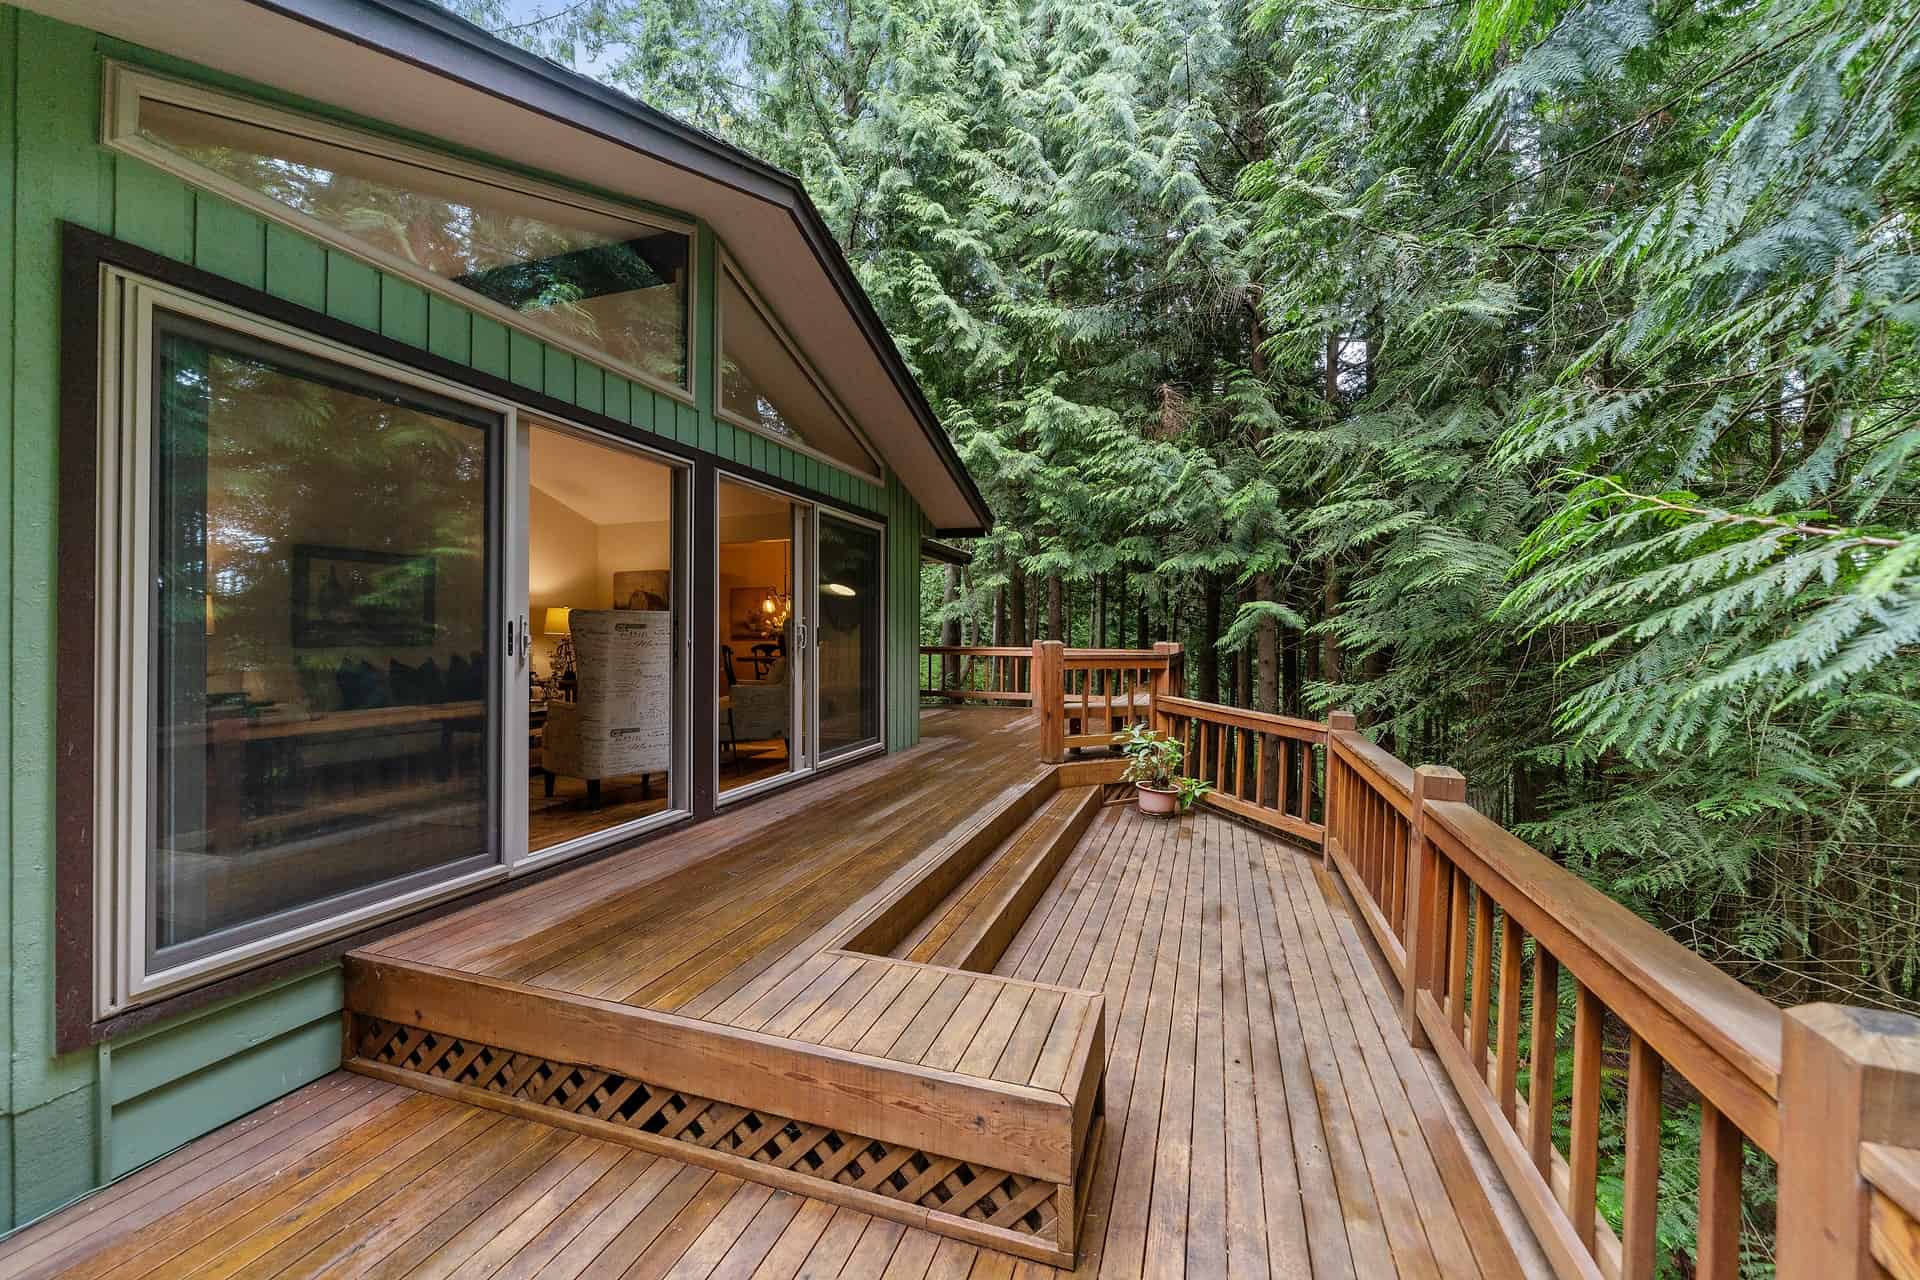 Beautiful deck surrounded by forest trees